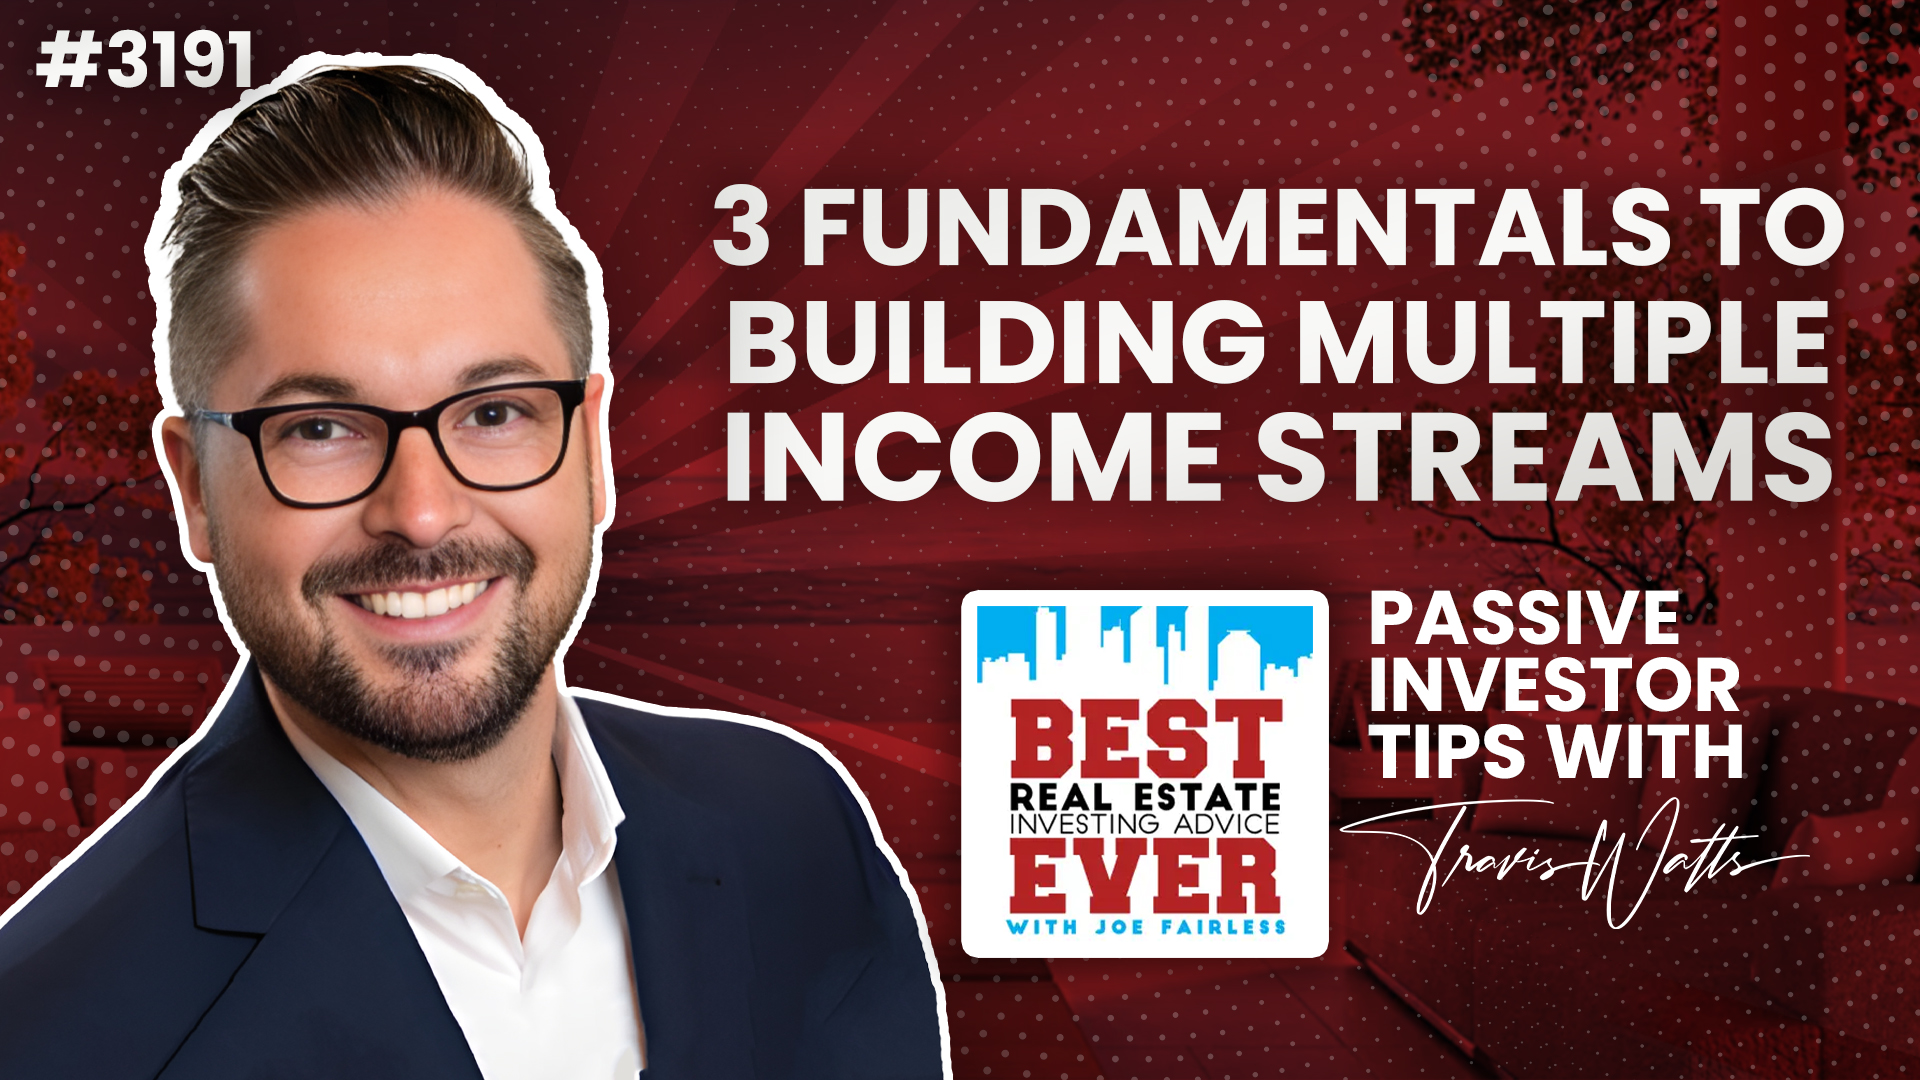 JF3191: 3 Fundamentals to Building Multiple Income Streams | Passive Investor Tips ft. Travis Watts